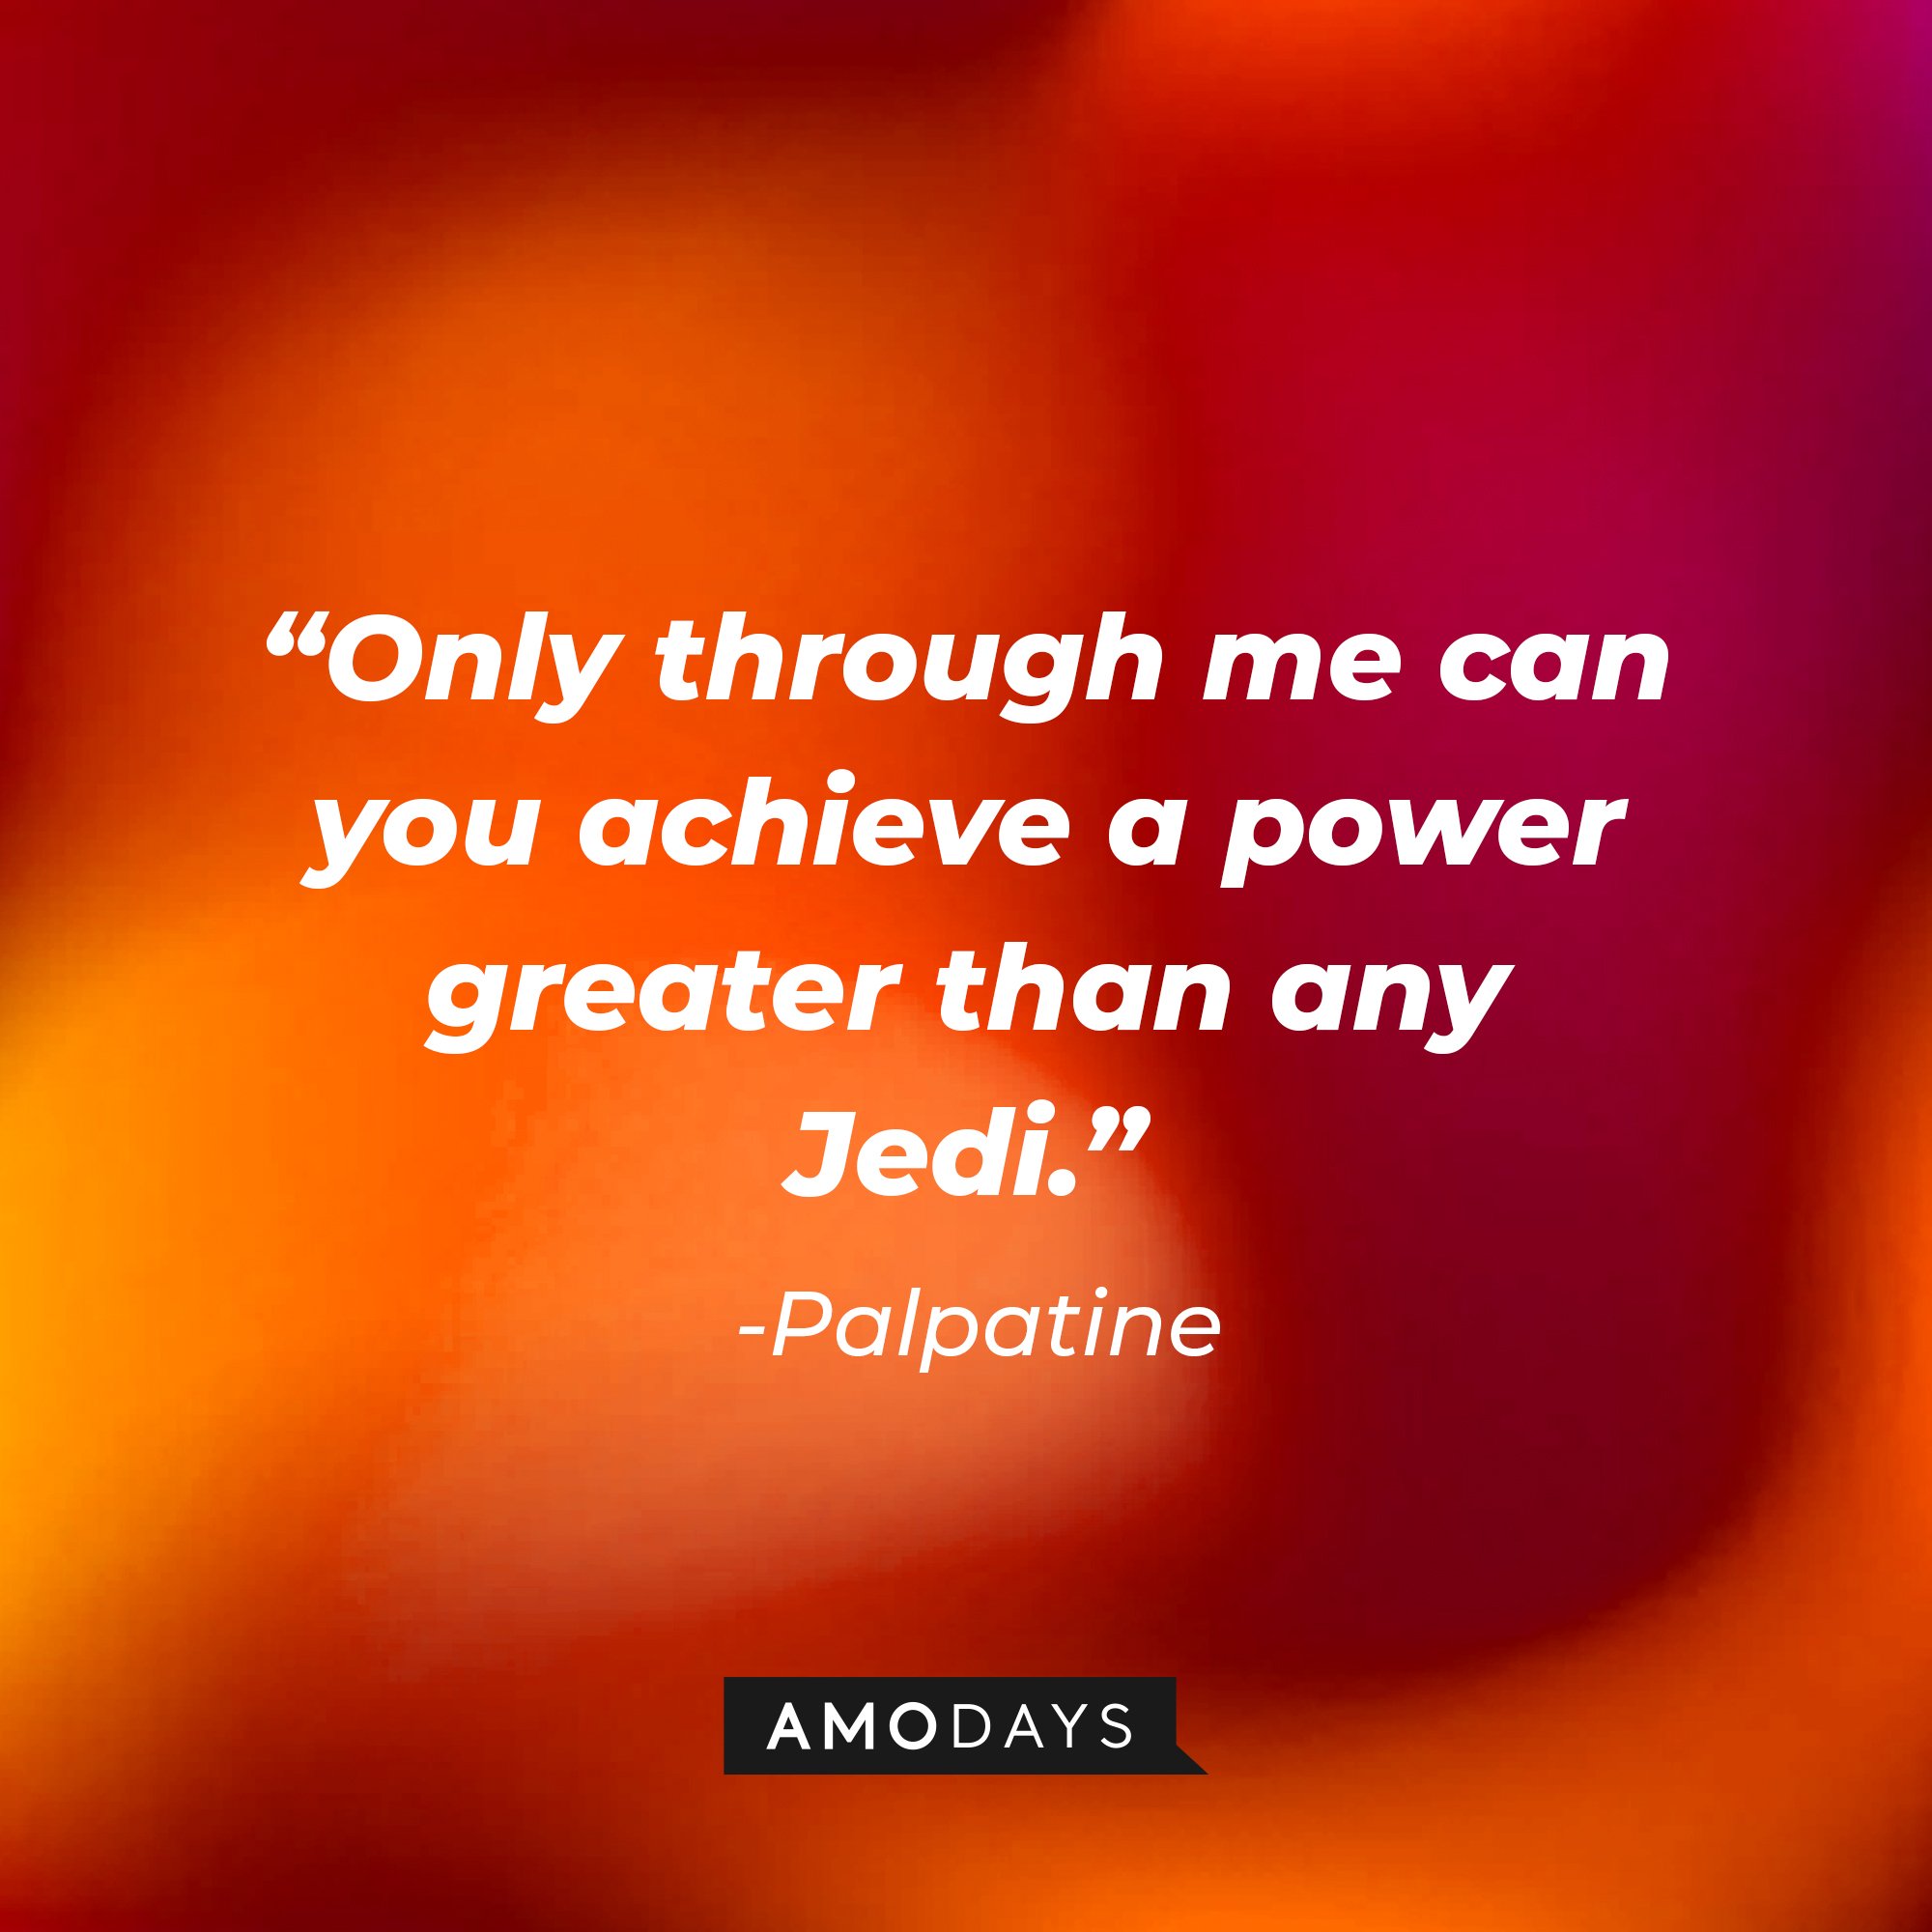 Palpatine's quote: “Only through me can you achieve a power greater than any Jedi.” | Image: AmoDays